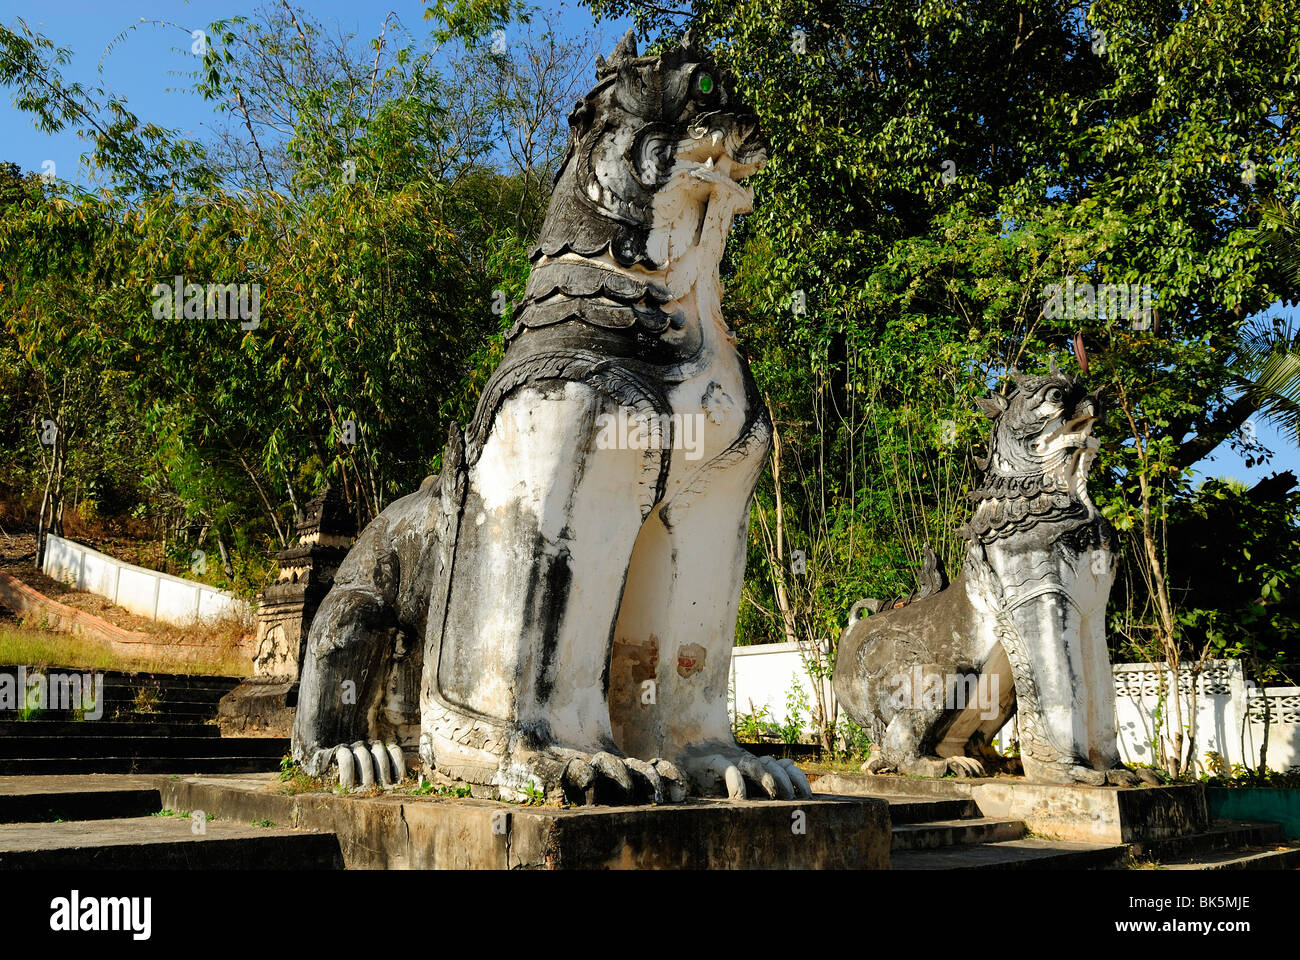 Lion statue in Wat Phra Non temple in Mae Hong Son, Thailand, Southeast Asia Stock Photo